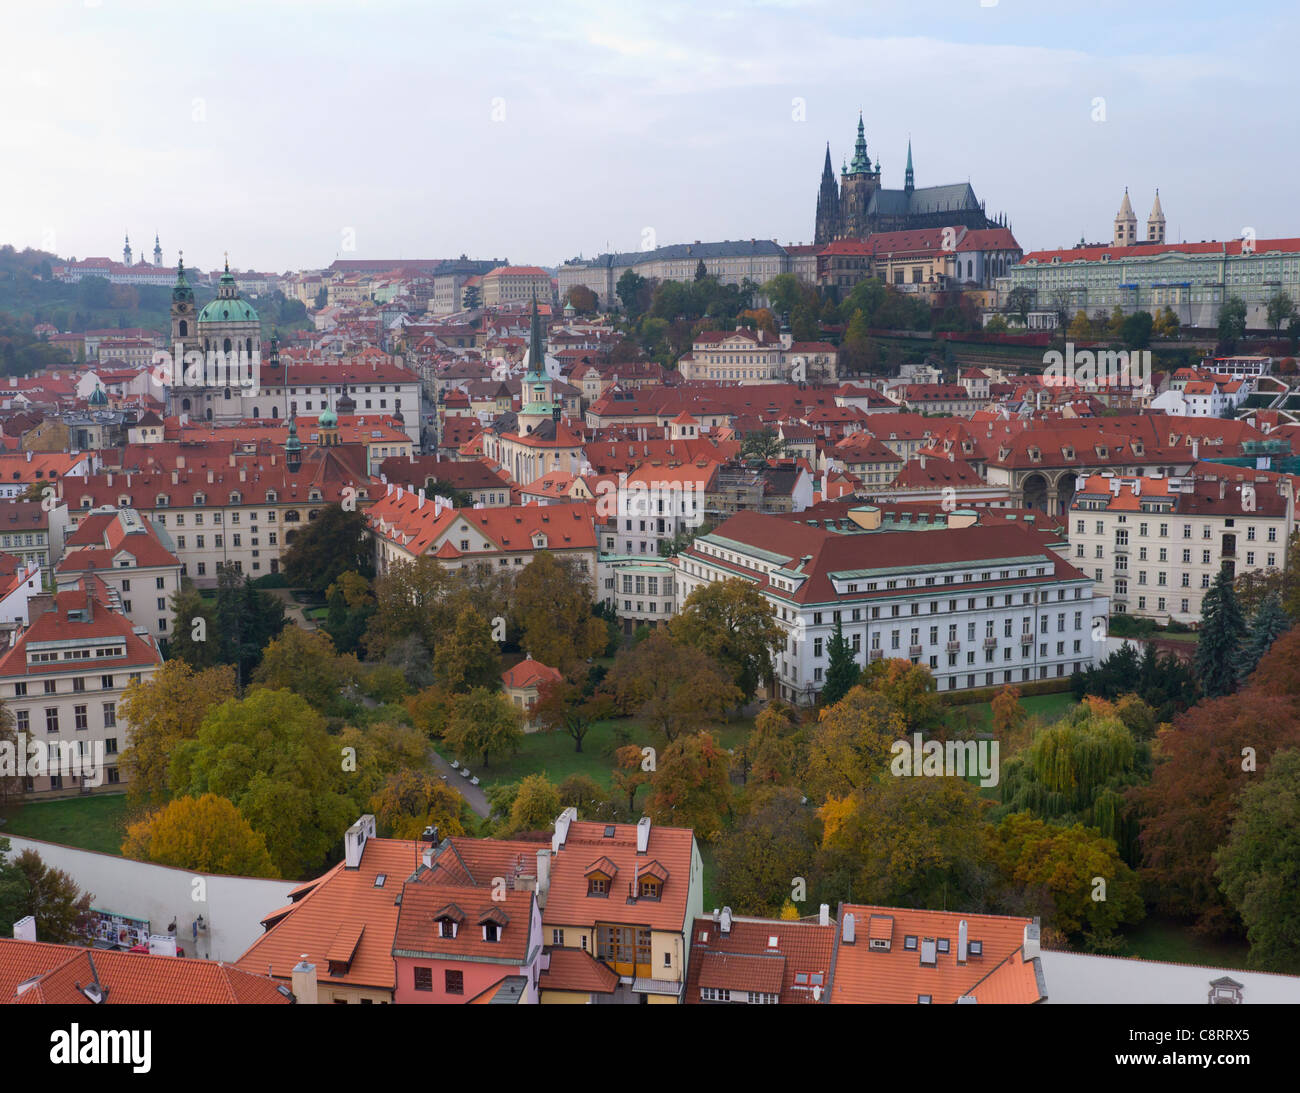 Ariel view of Mala Strana Old Town district with castle in Prague in Czech Republic Stock Photo